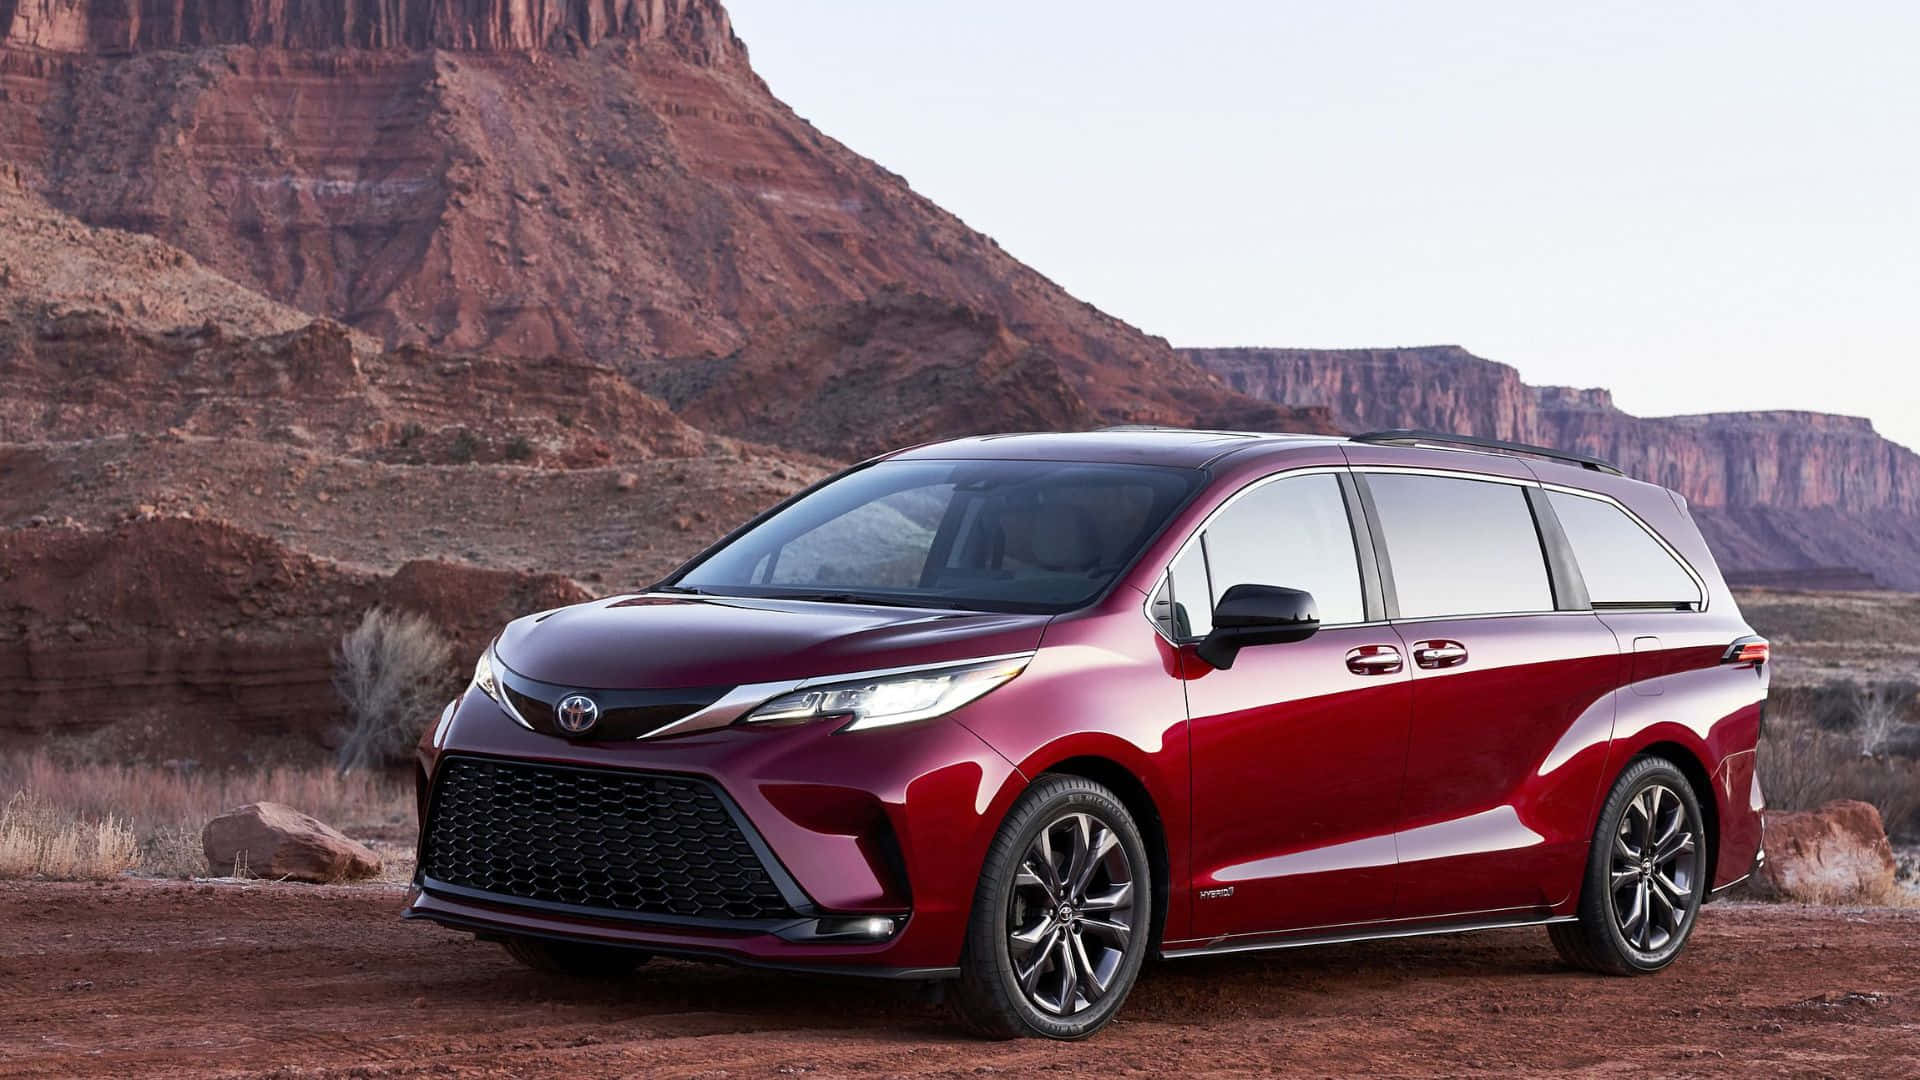 Captivating Glimpse Of A Toyota Sienna Wallpaper